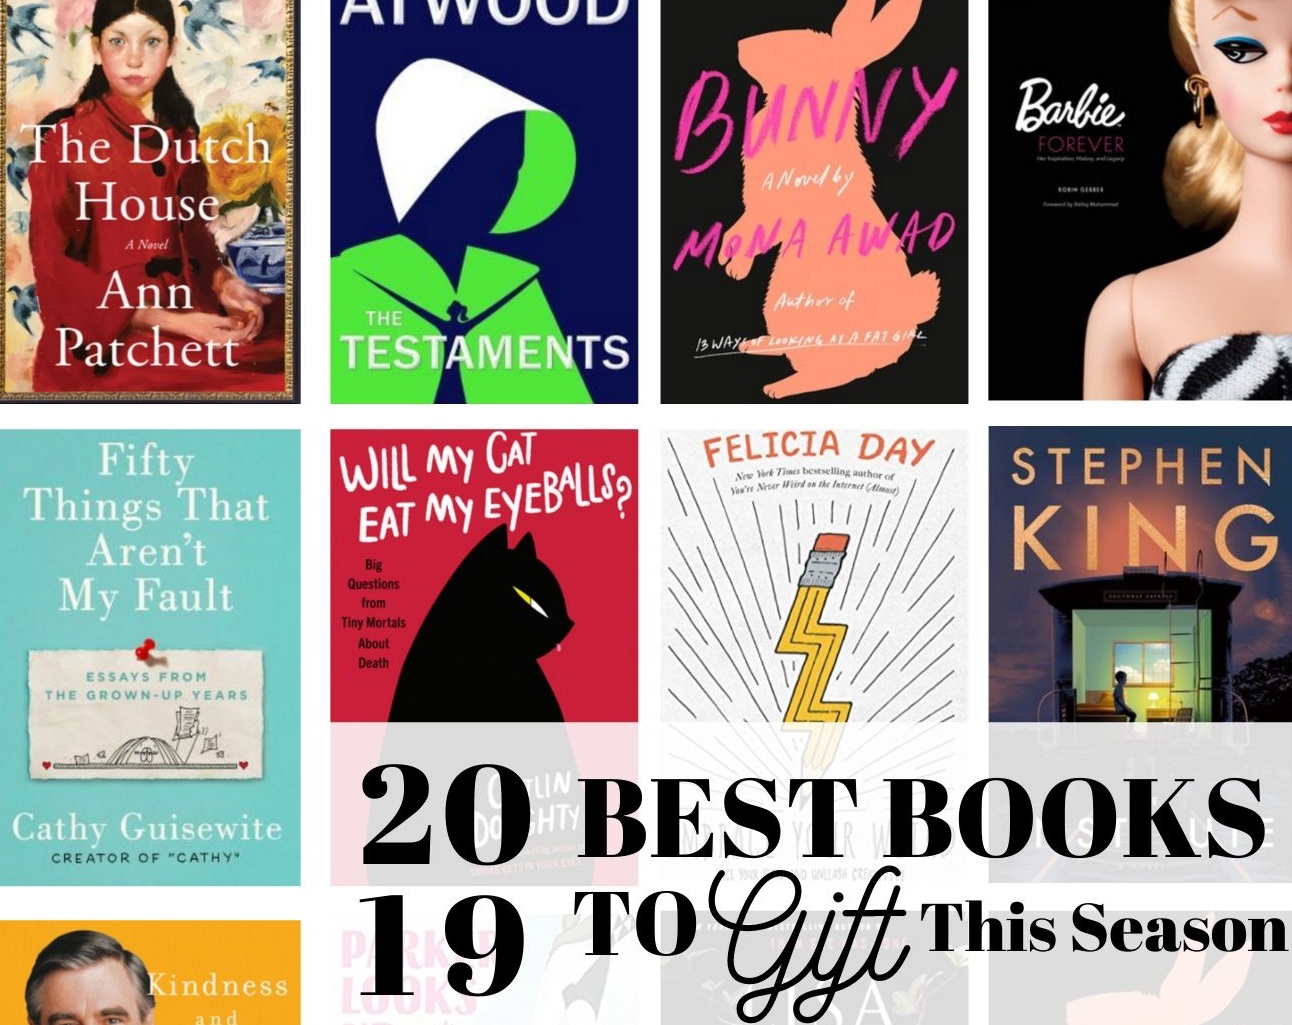 12 Days of Christmas … Day 3, Best Books to Gift This Holiday Season